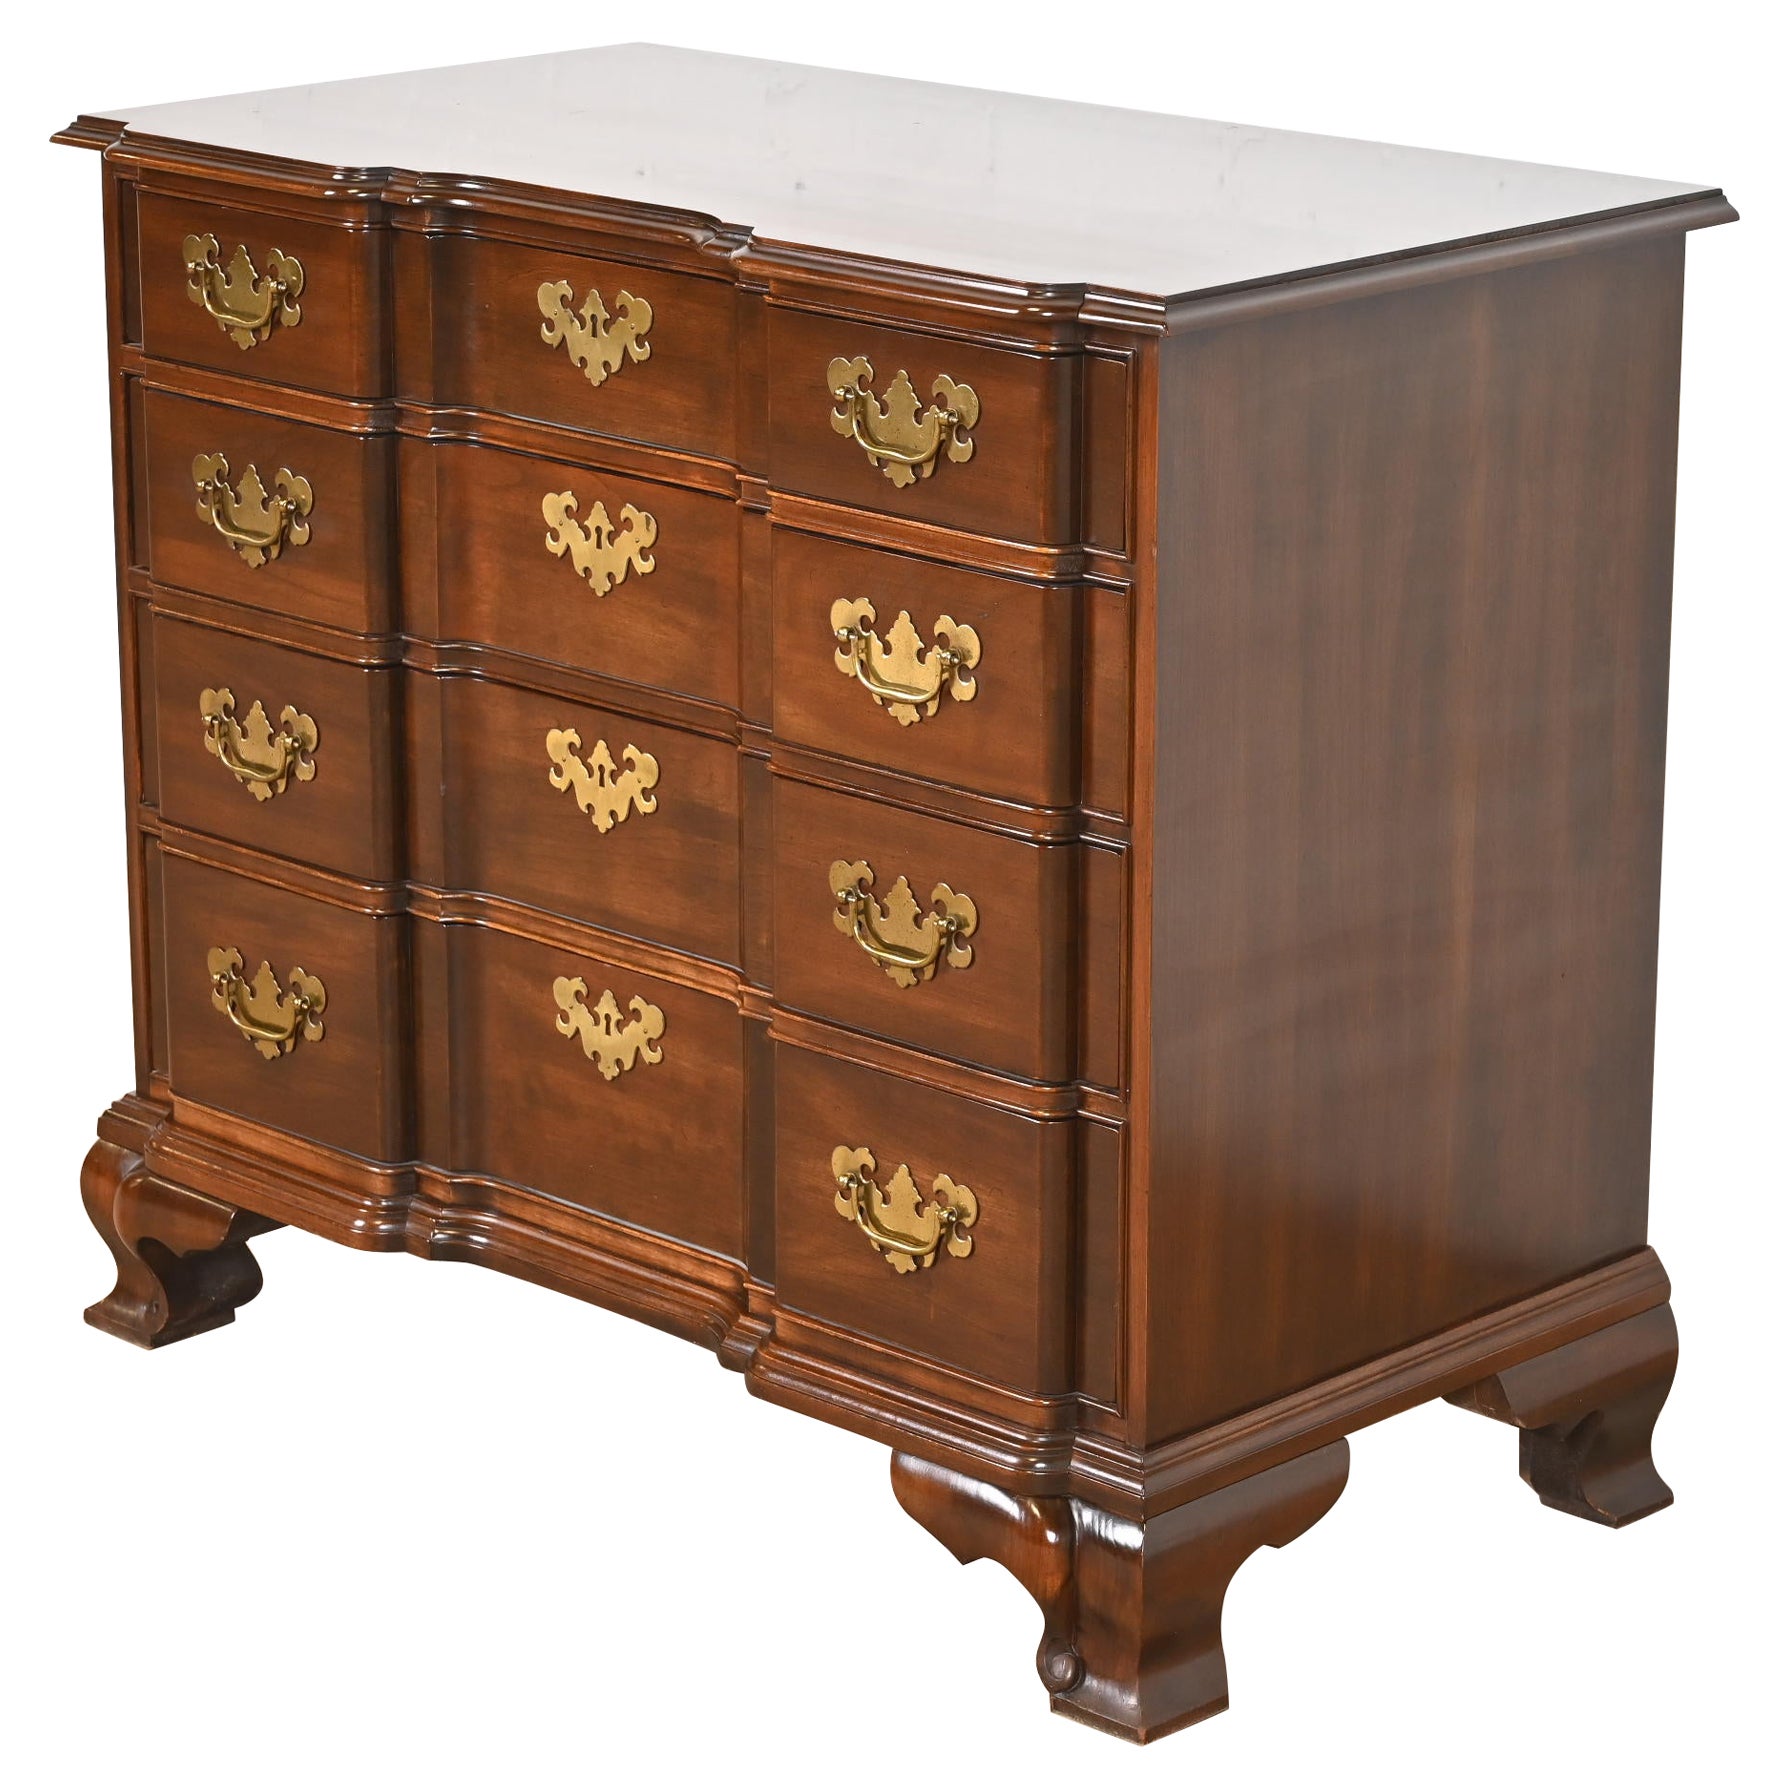 Georgian Solid Cherry Wood Block Front Chest of Drawers